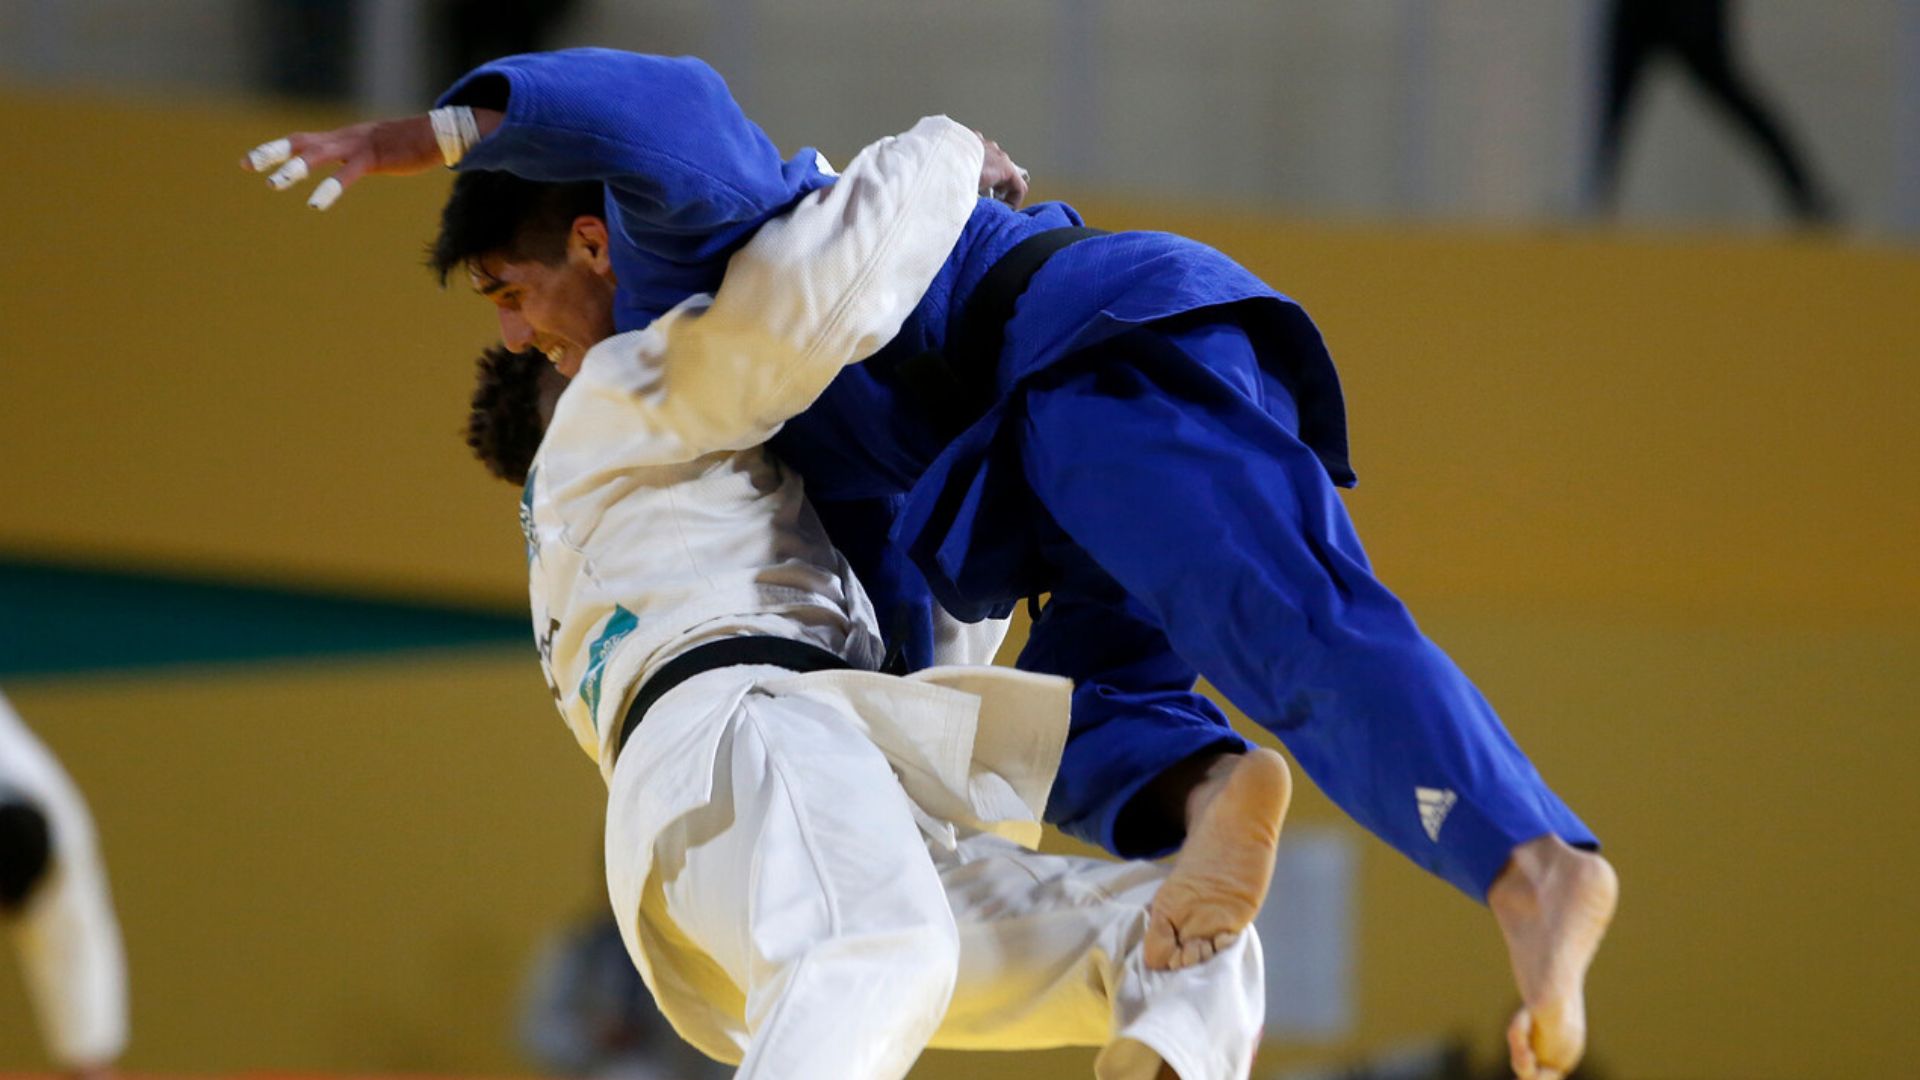 Brazil extends Judo dominance, leaving Chile wanting for another gold medal